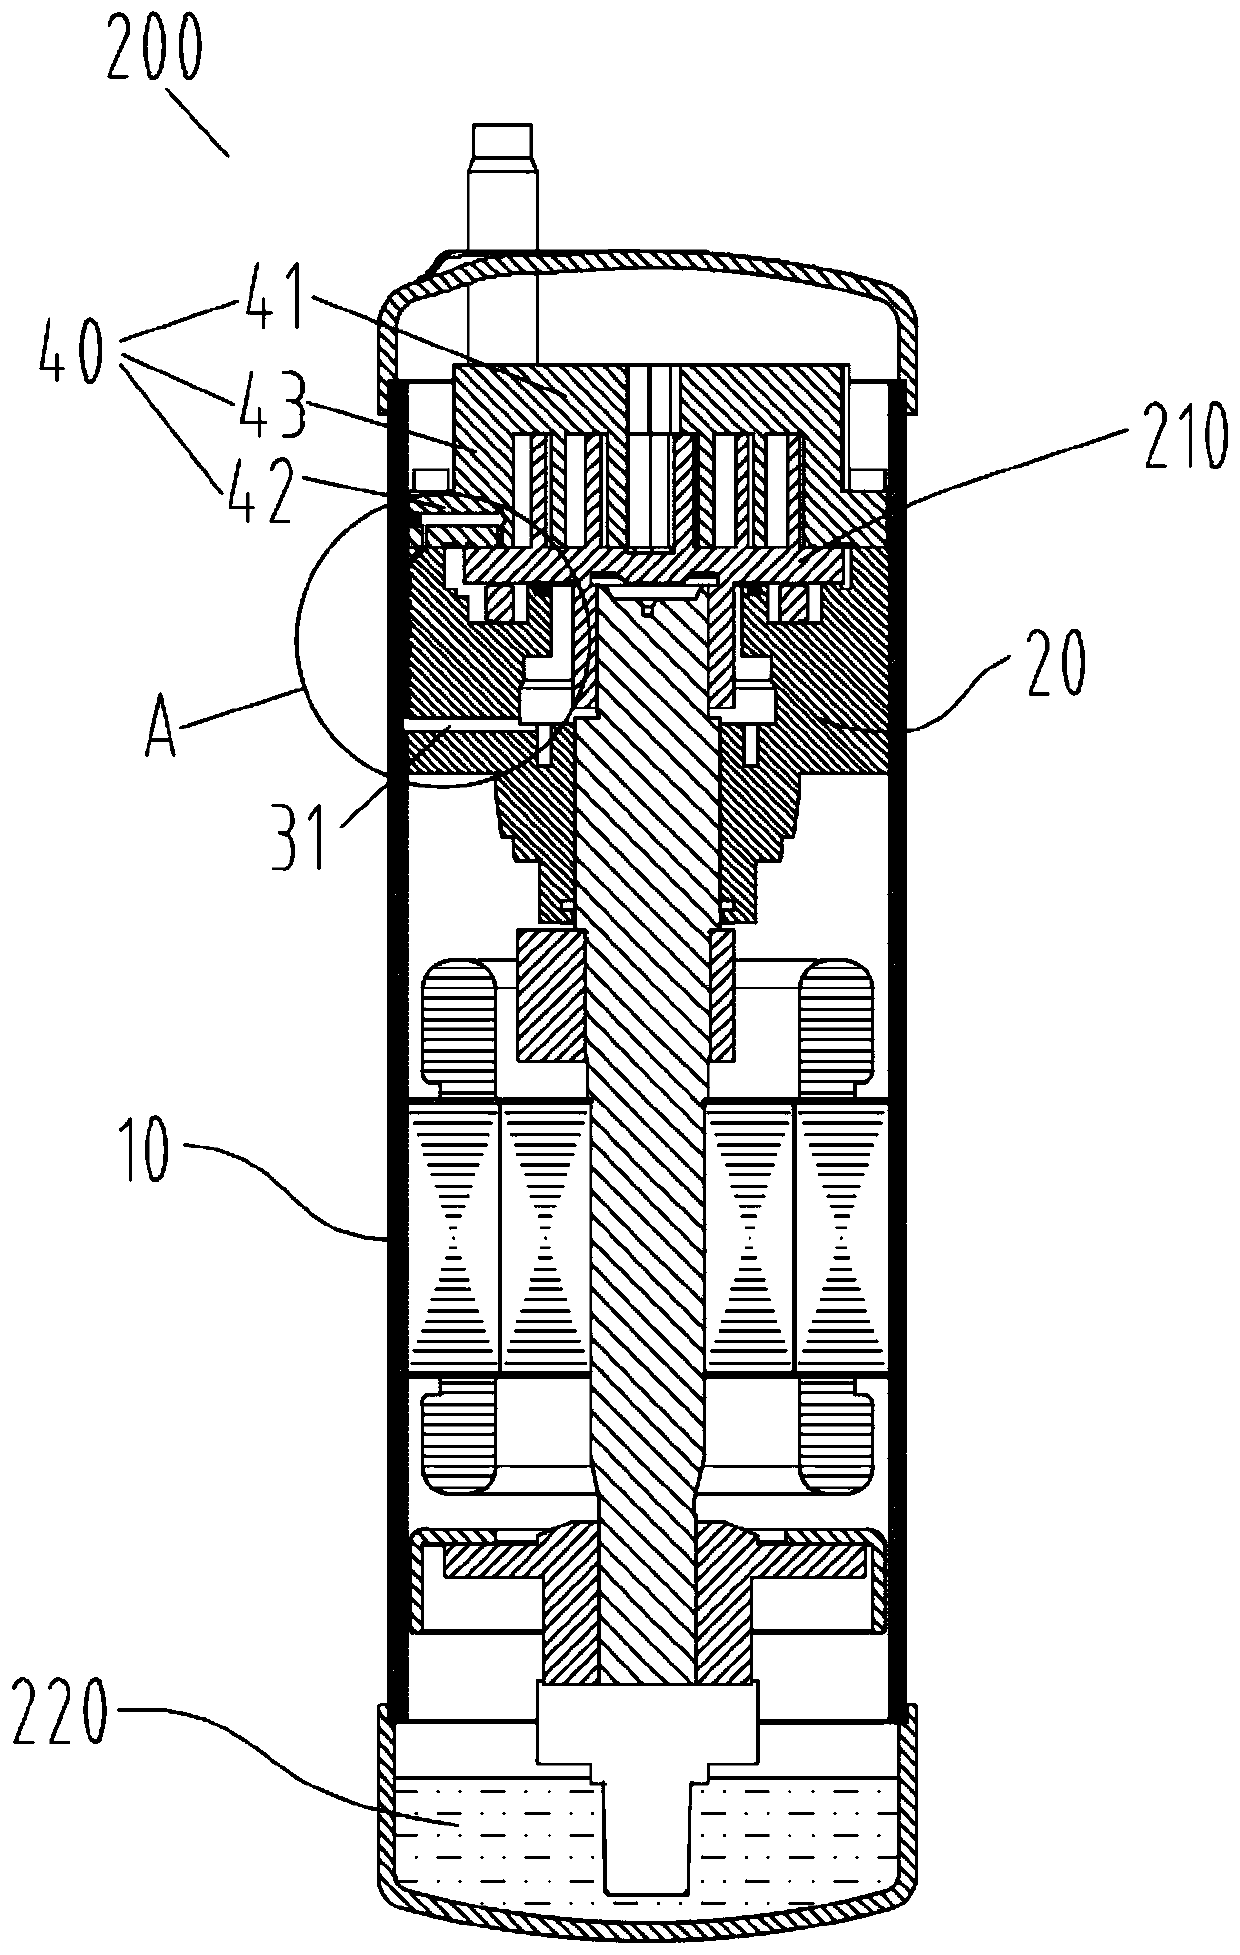 Oil way structure and compressor with same